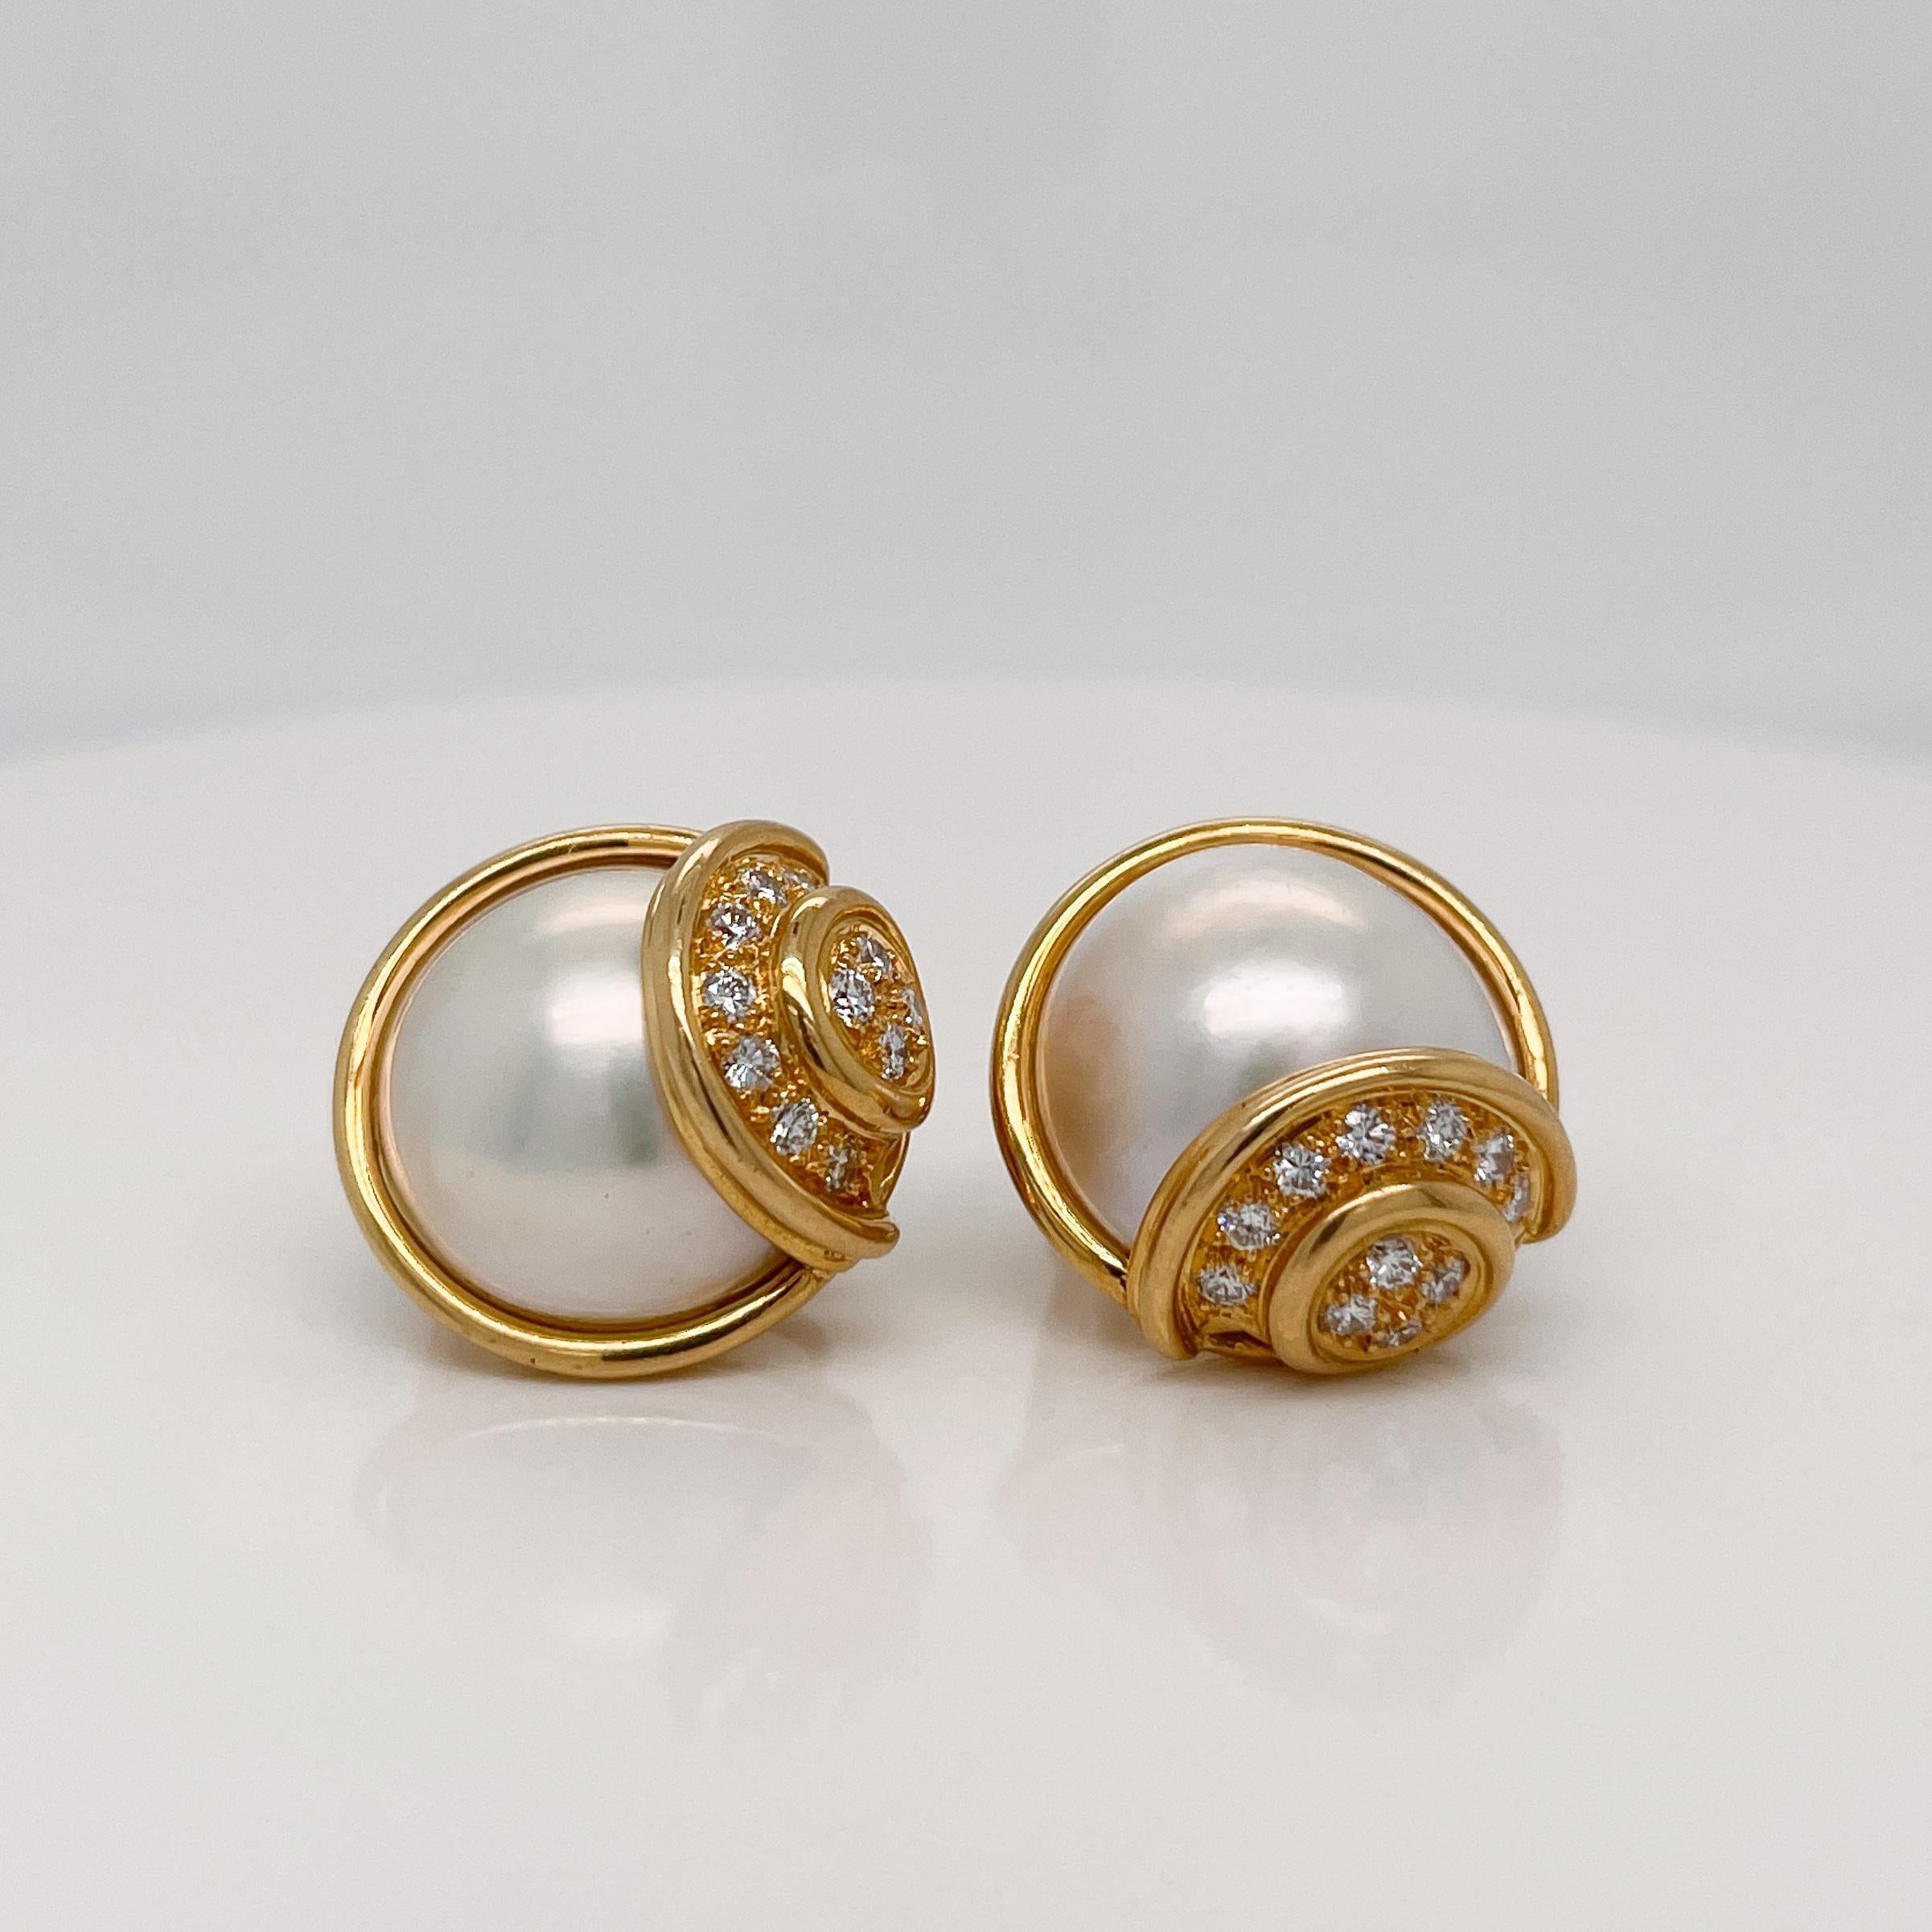 Pair of Signed Gübelin 18K Gold, Diamond & Mabe Pearl Clip-On Earrings In Good Condition For Sale In Philadelphia, PA